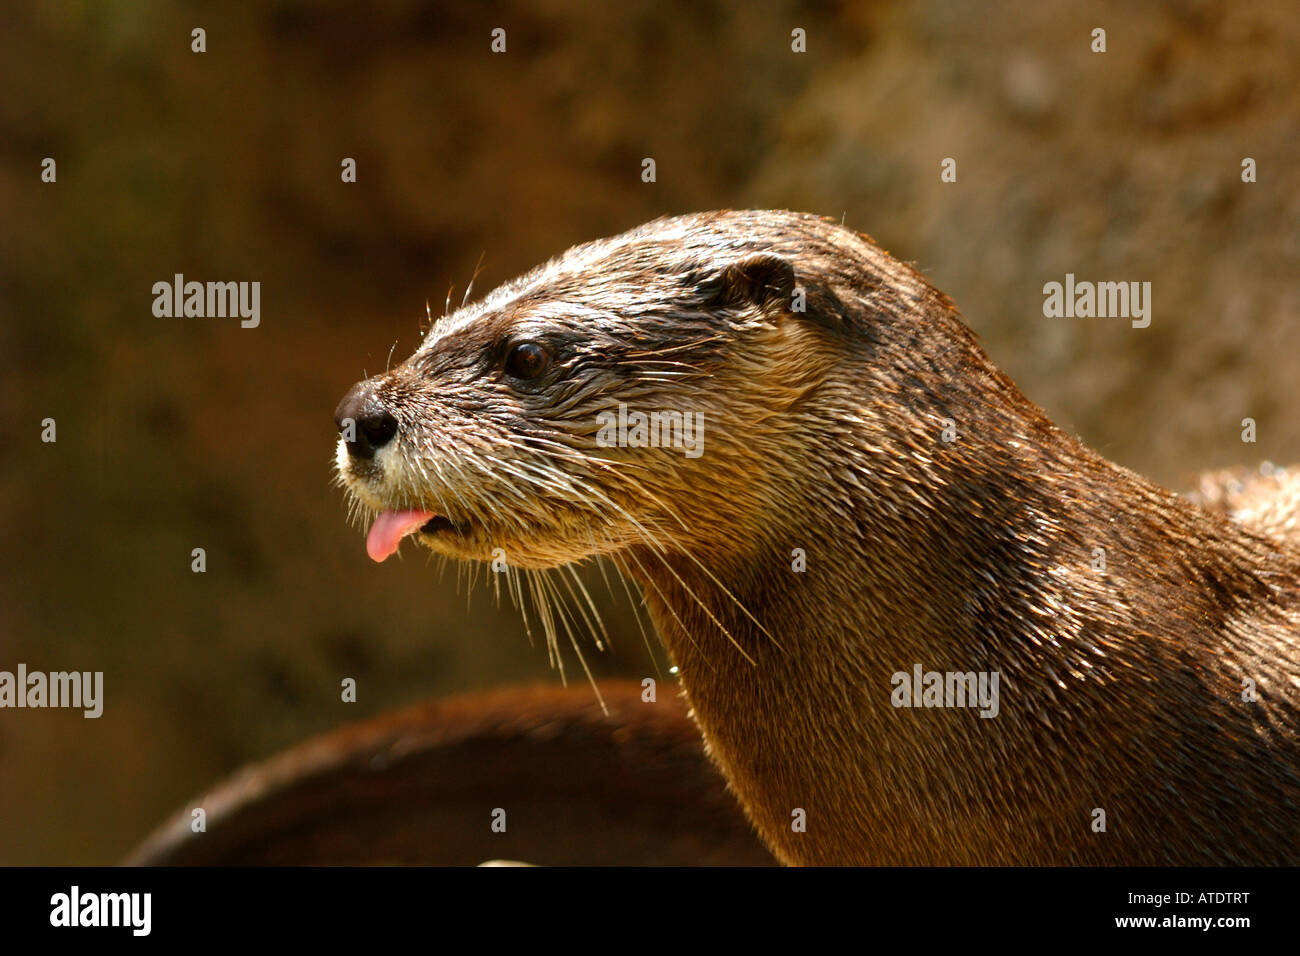 Northern River Otter Lontra canadensis Florida c Stock Photo